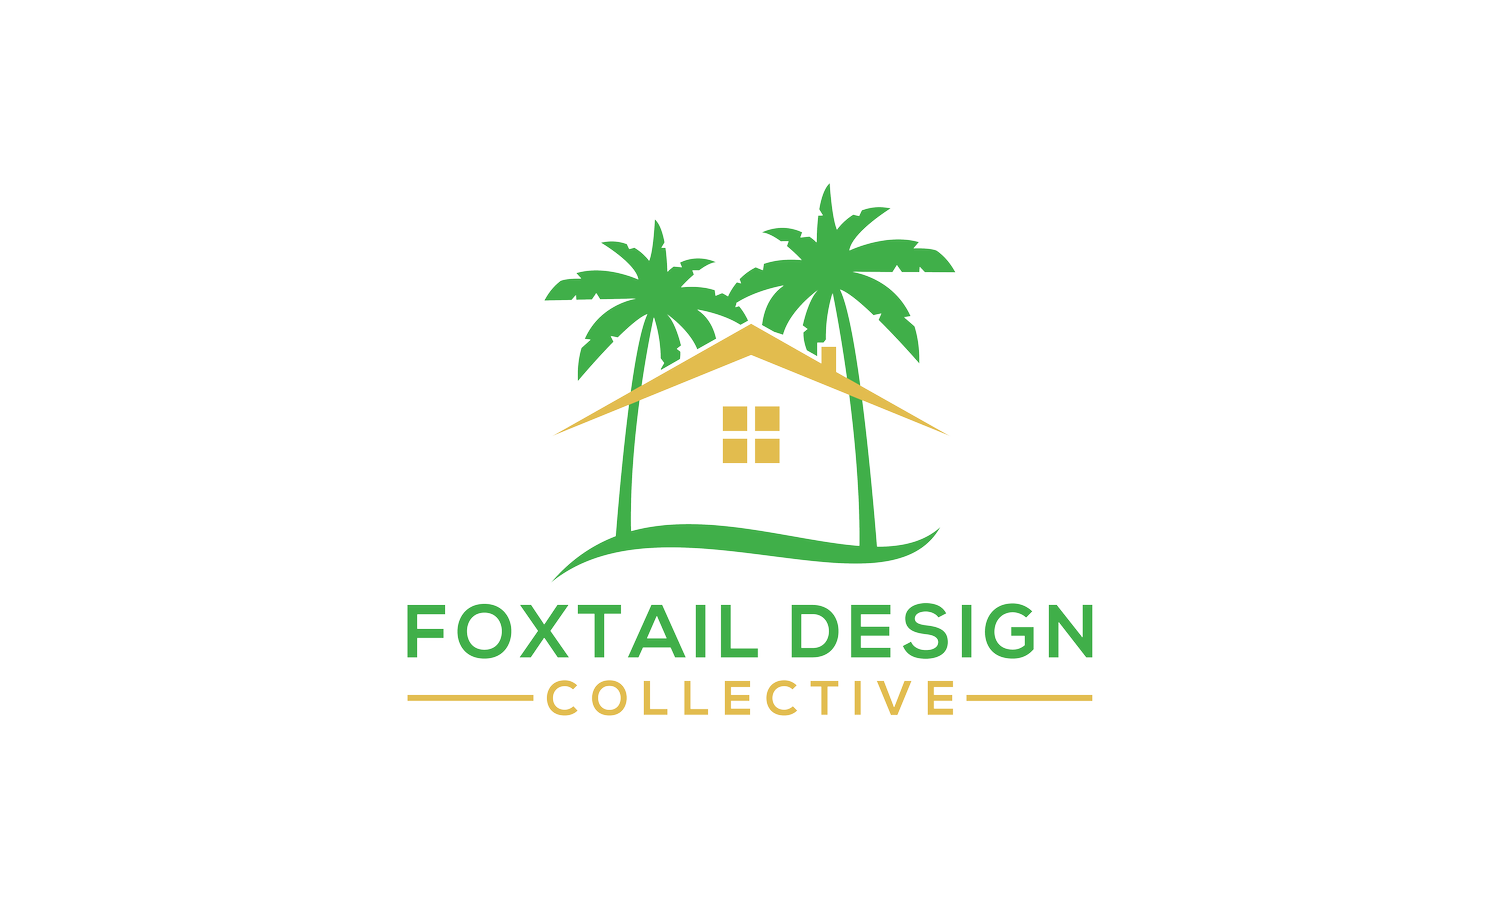 Foxtail Home Designs